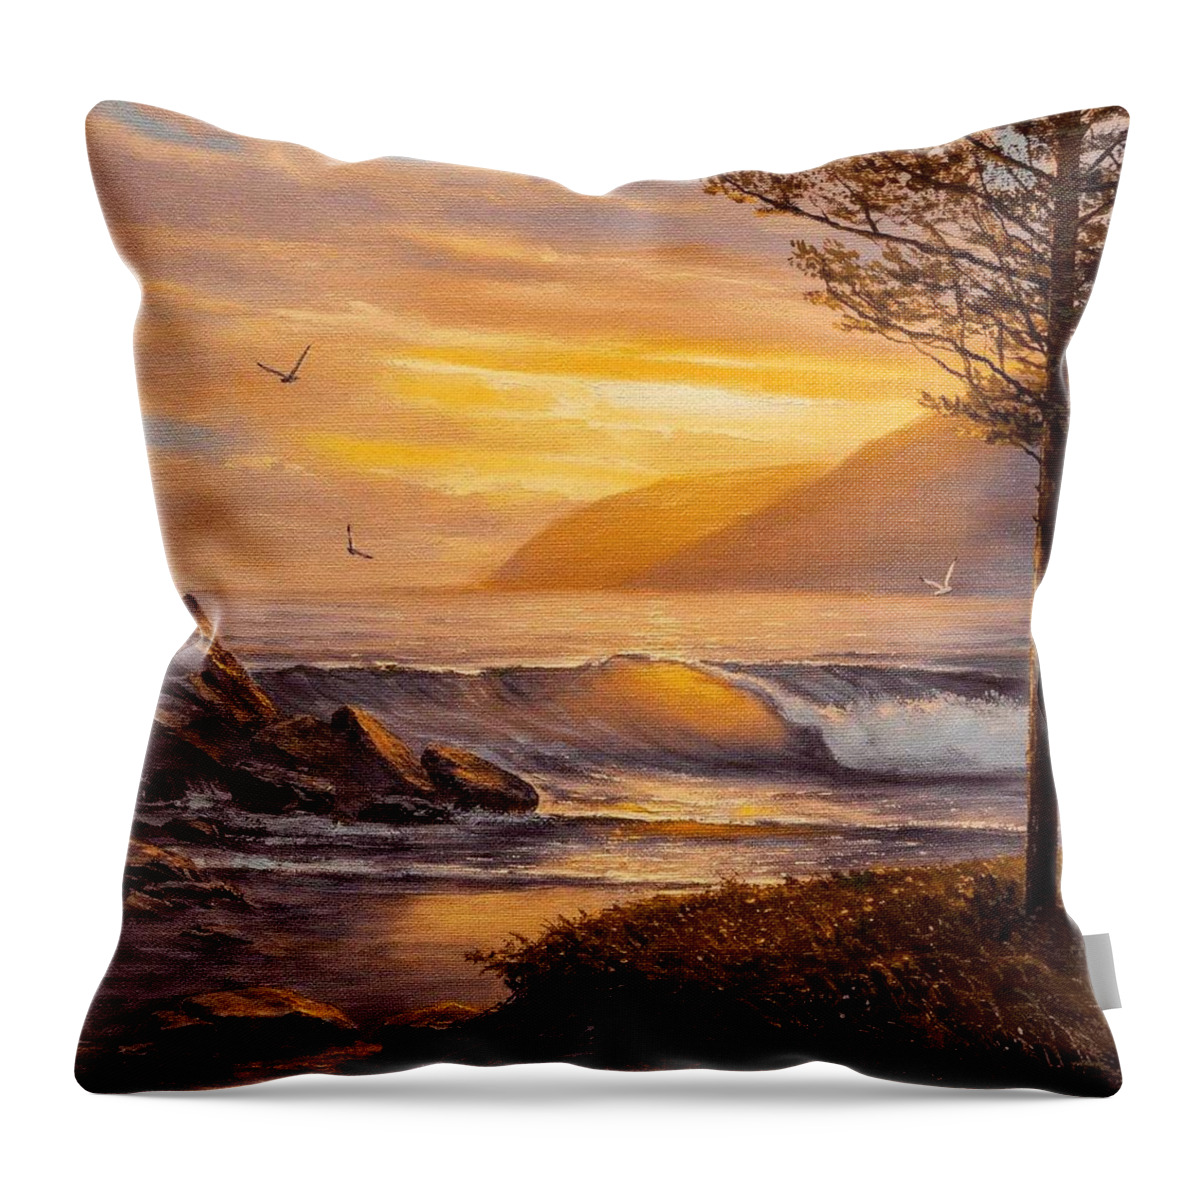 Sunset Throw Pillow featuring the painting Sunset Seas by Teresa Trotter